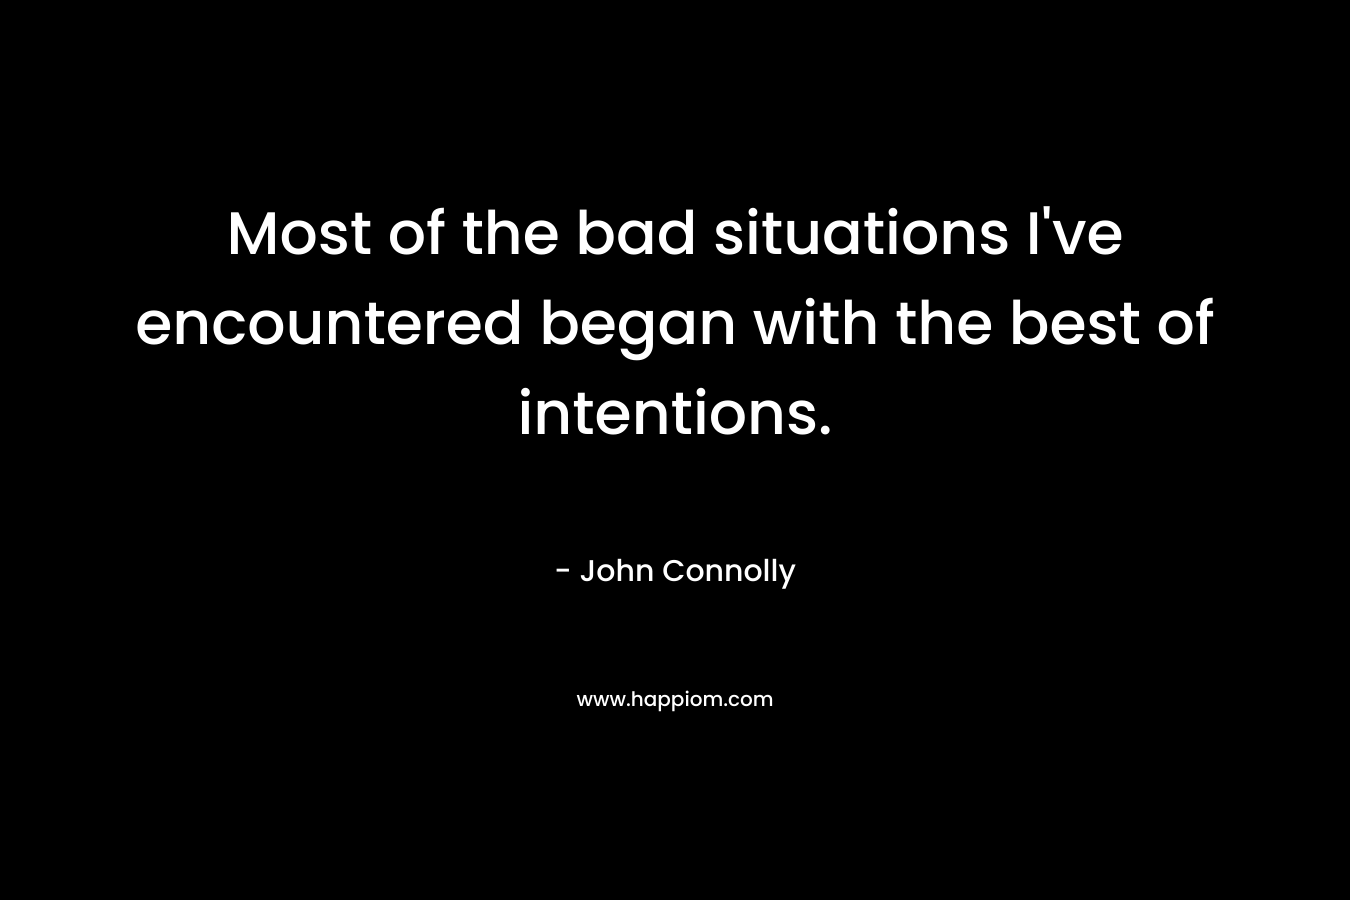 Most of the bad situations I’ve encountered began with the best of intentions. – John Connolly